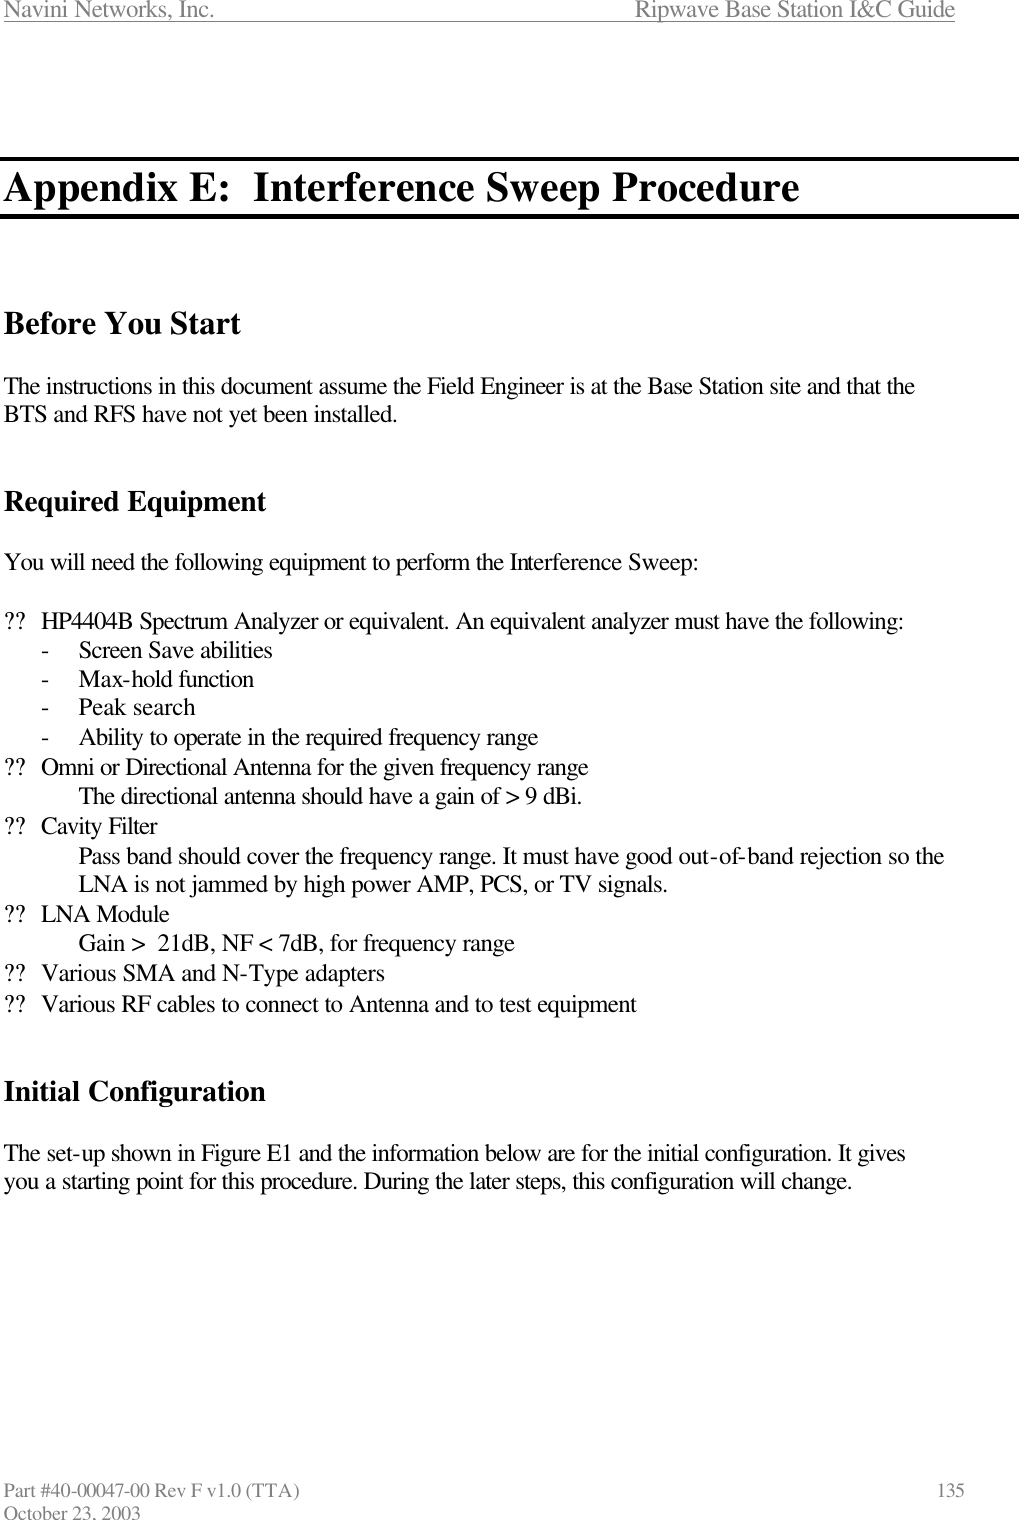 Navini Networks, Inc.                      Ripwave Base Station I&amp;C Guide Part #40-00047-00 Rev F v1.0 (TTA)                            135 October 23, 2003    Appendix E:  Interference Sweep Procedure    Before You Start  The instructions in this document assume the Field Engineer is at the Base Station site and that the BTS and RFS have not yet been installed.    Required Equipment  You will need the following equipment to perform the Interference Sweep:  ?? HP4404B Spectrum Analyzer or equivalent. An equivalent analyzer must have the following: - Screen Save abilities - Max-hold function - Peak search - Ability to operate in the required frequency range ?? Omni or Directional Antenna for the given frequency range The directional antenna should have a gain of &gt; 9 dBi. ?? Cavity Filter Pass band should cover the frequency range. It must have good out-of-band rejection so the LNA is not jammed by high power AMP, PCS, or TV signals. ?? LNA Module Gain &gt;  21dB, NF &lt; 7dB, for frequency range ?? Various SMA and N-Type adapters ?? Various RF cables to connect to Antenna and to test equipment   Initial Configuration  The set-up shown in Figure E1 and the information below are for the initial configuration. It gives you a starting point for this procedure. During the later steps, this configuration will change.        